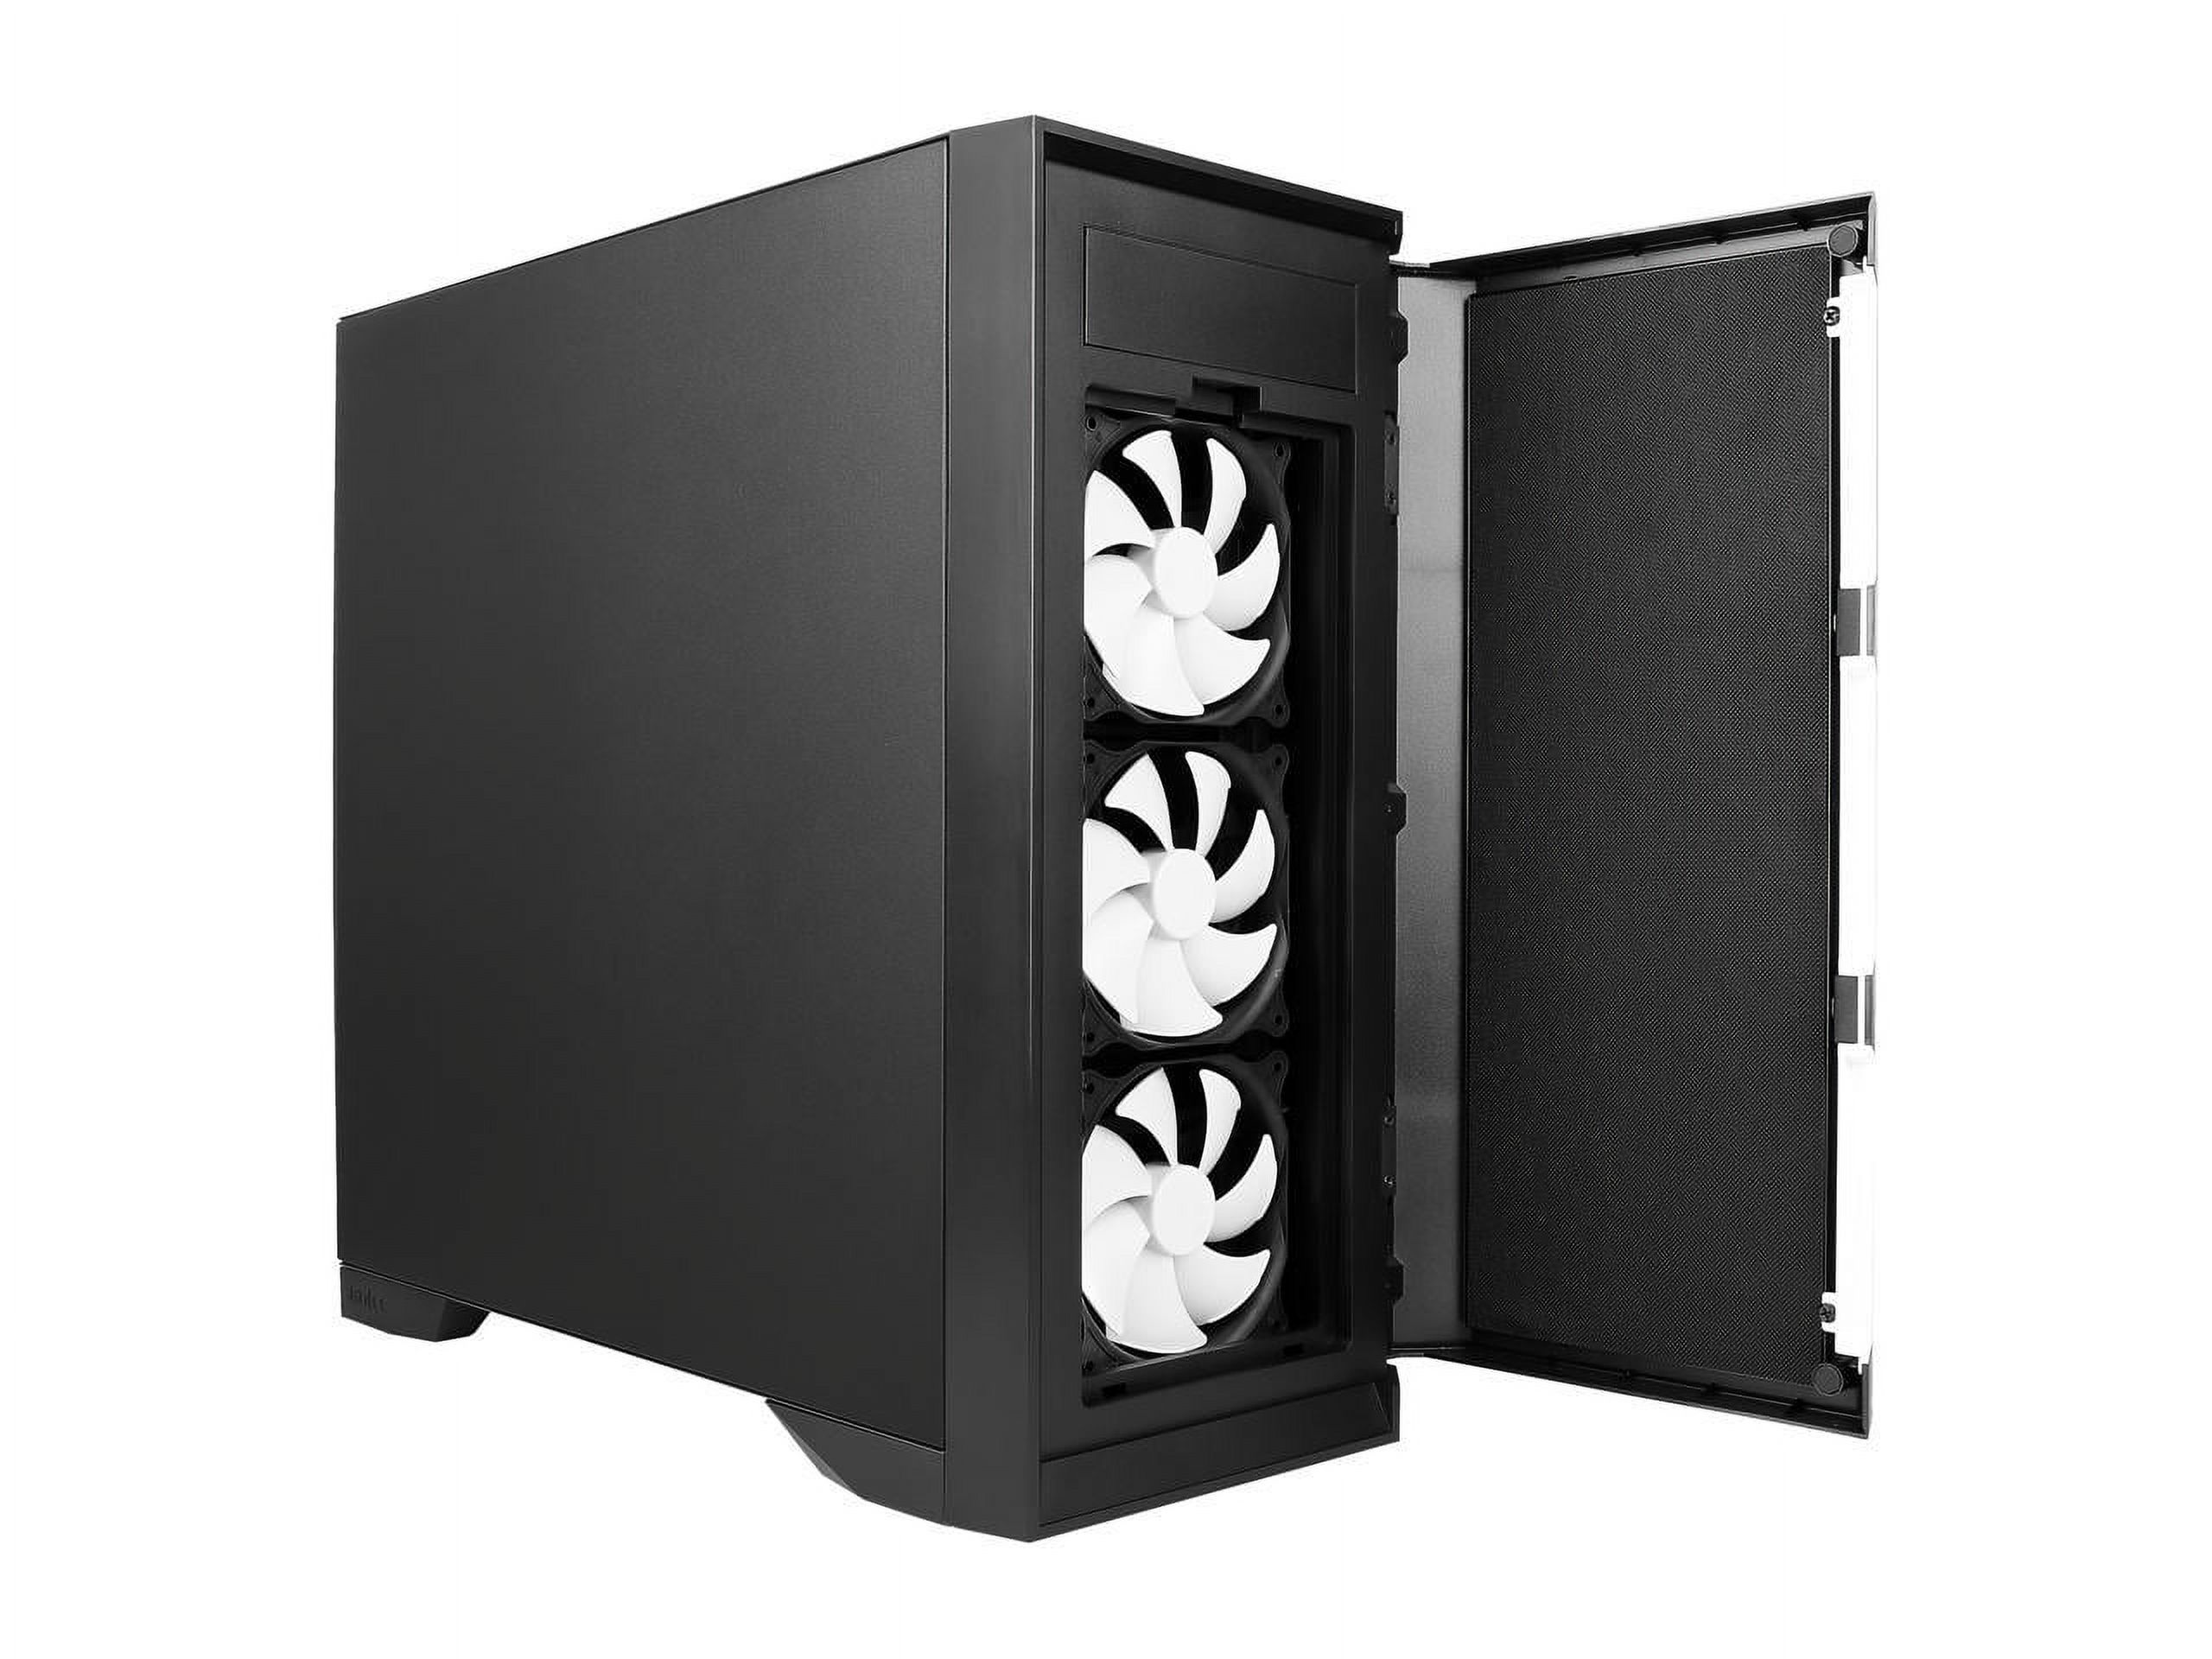 Antec Performance Series P101 Silent Black 0.8mm SPCC ATX Mid Tower Case with 8 x 3.5" HDD / 2.5" SSD Removable Bays - image 3 of 19